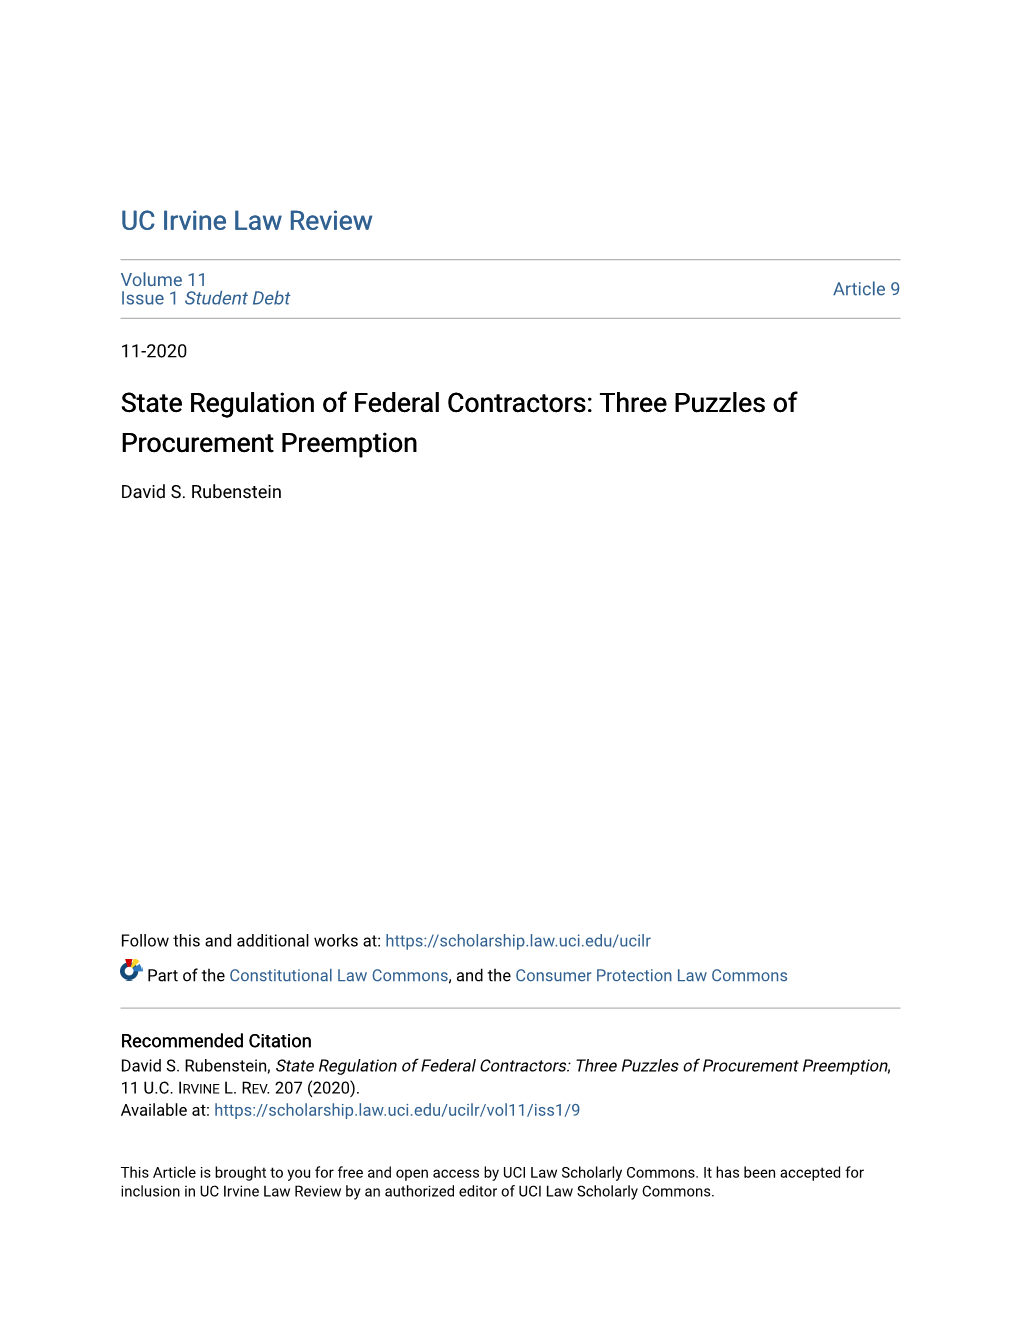 State Regulation of Federal Contractors: Three Puzzles of Procurement Preemption